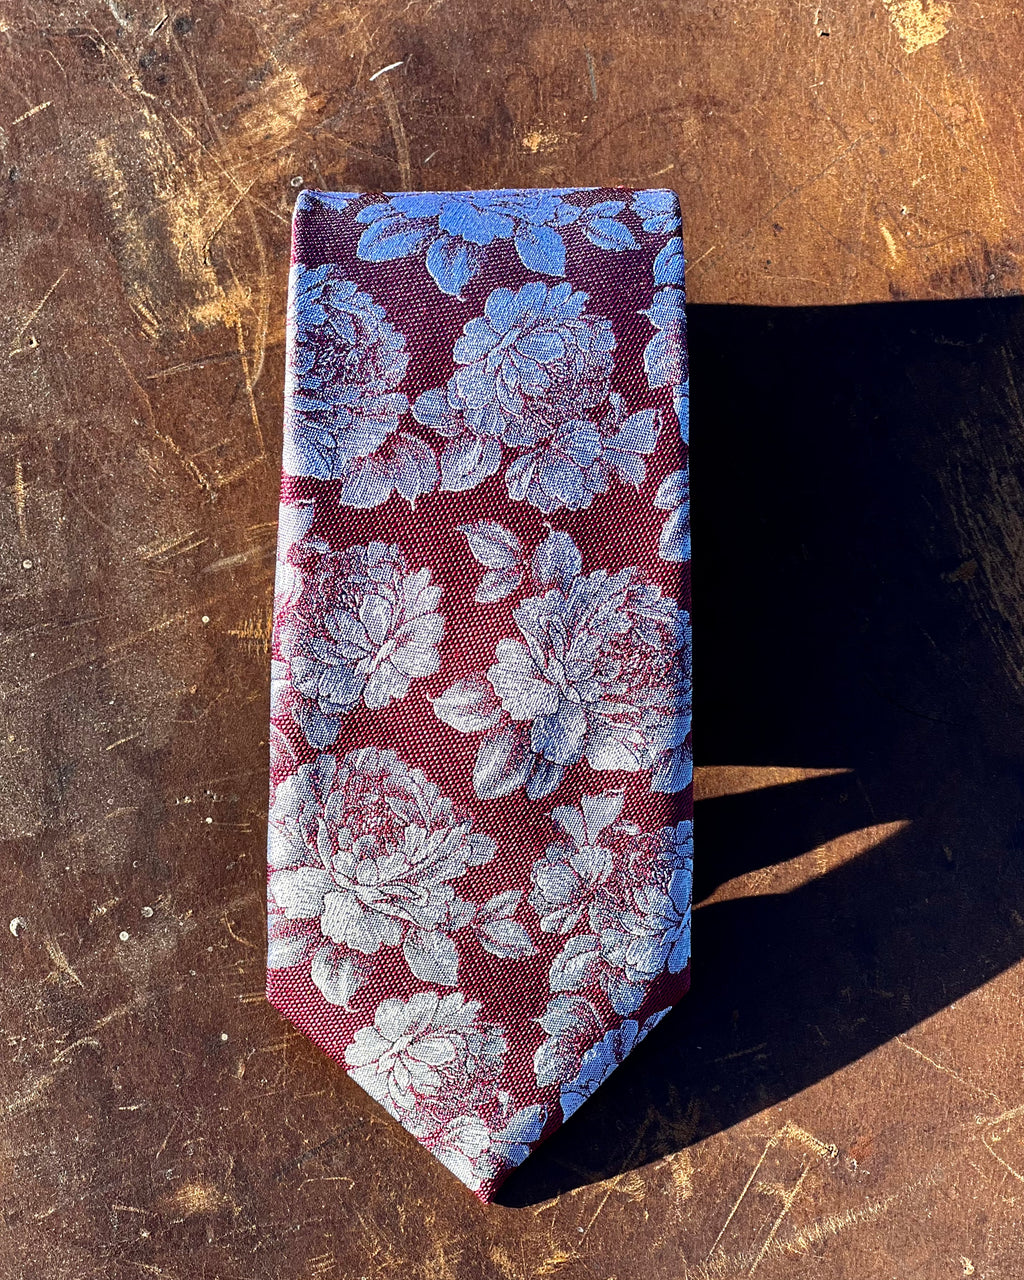 Pure silk tie featuring white roses against burgundy ground